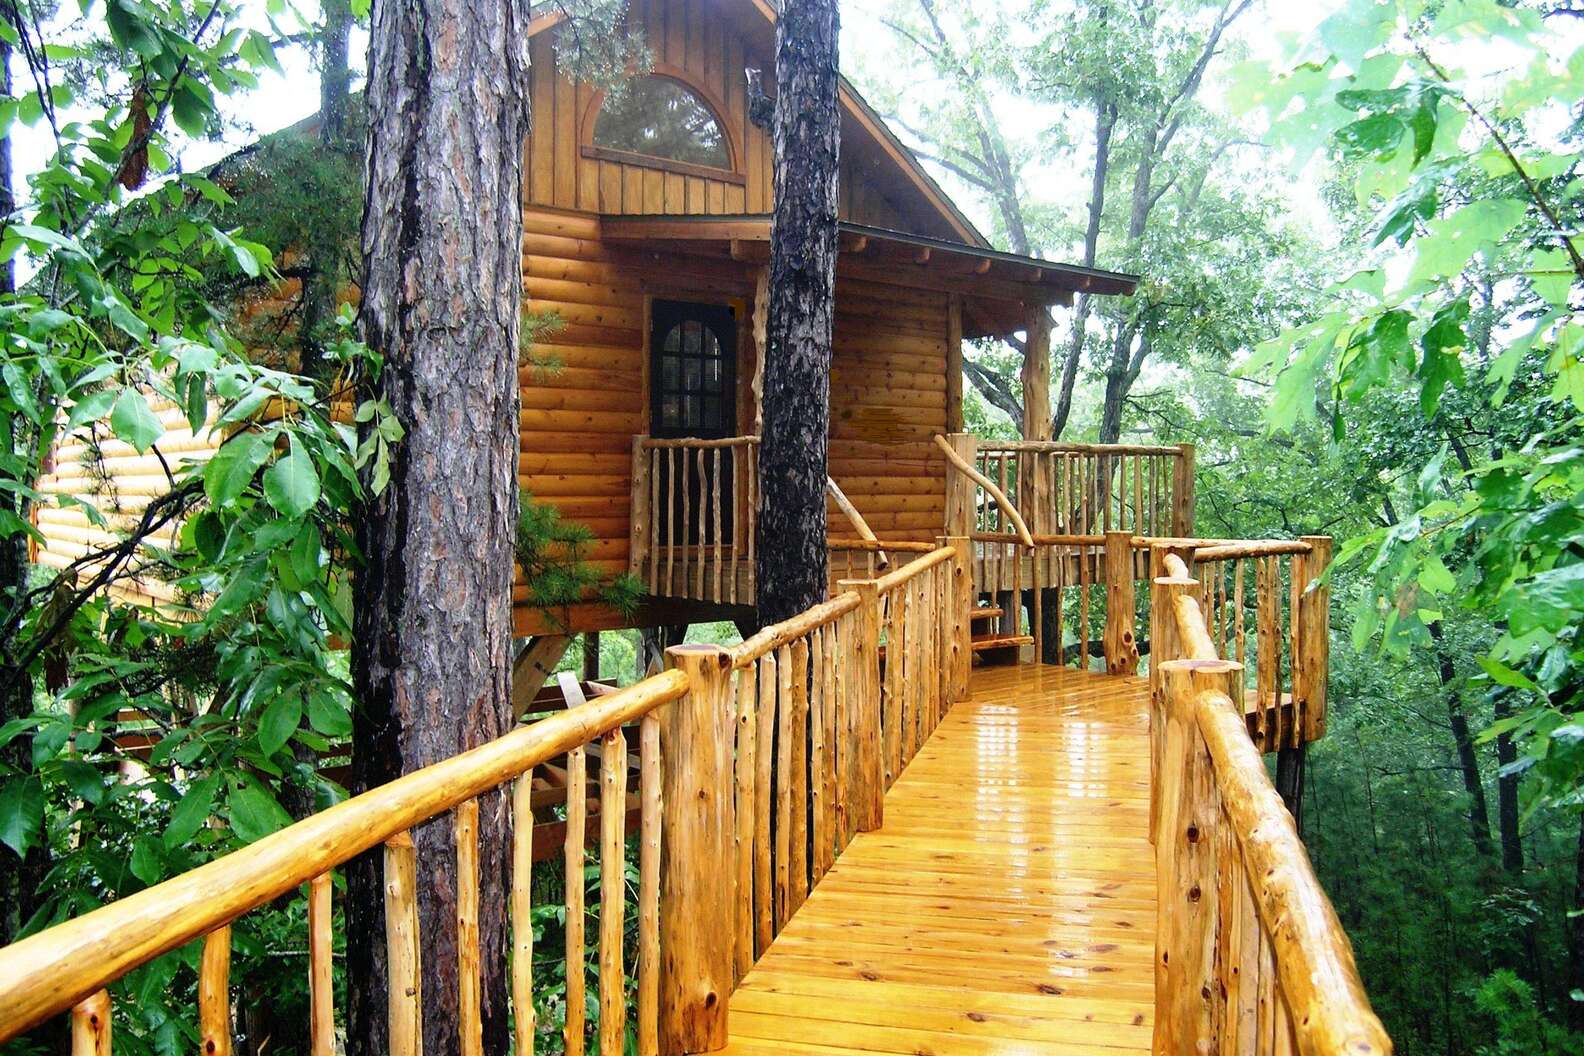 Courtesy of The Original Treehouse Cottages